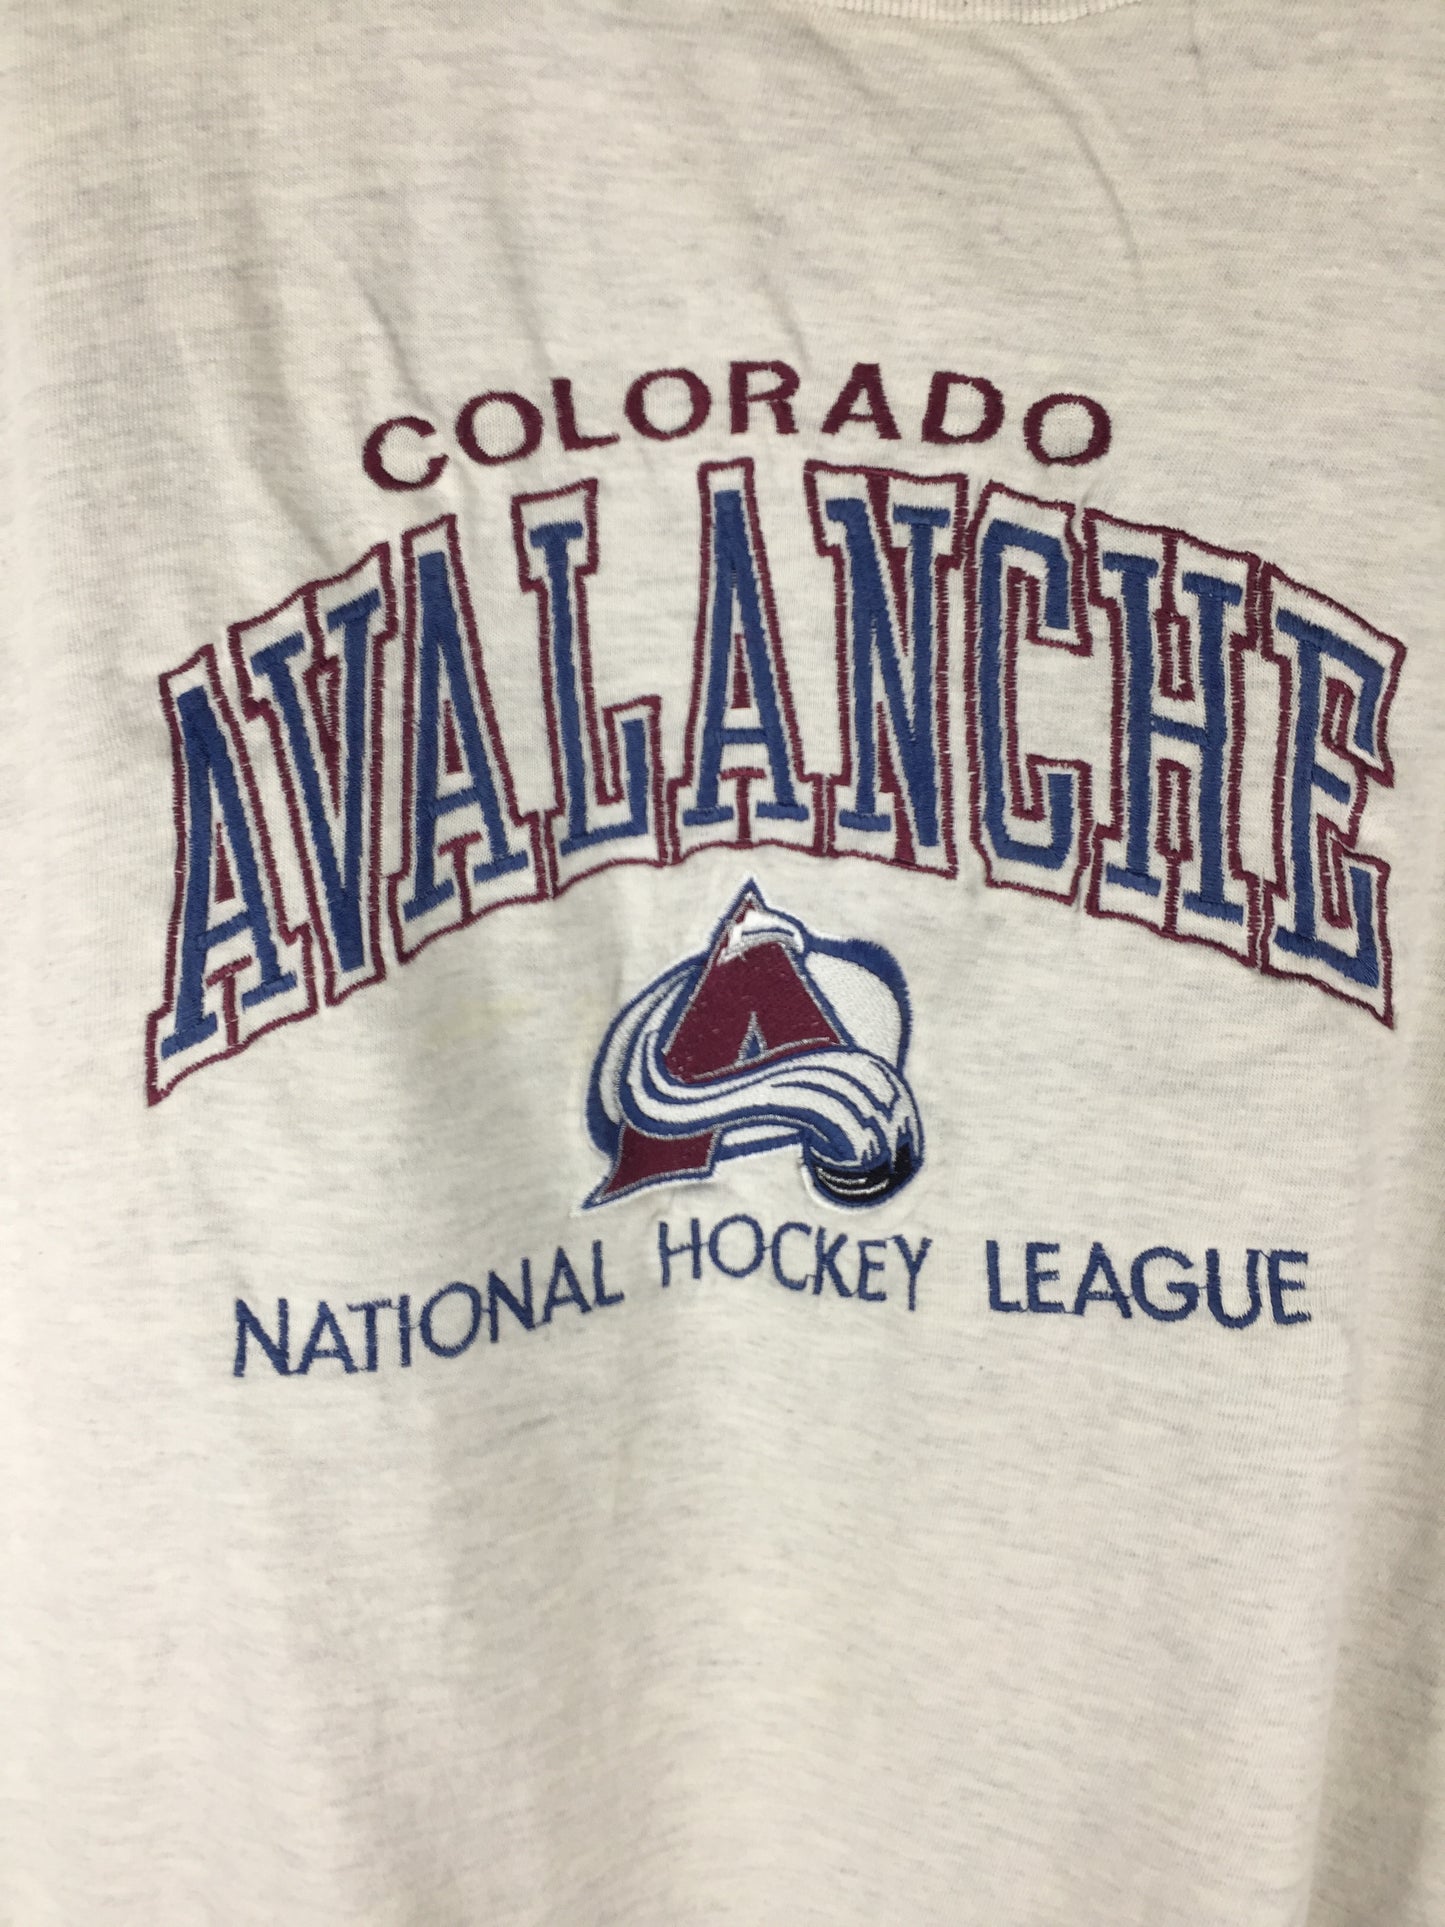 Vintage Colorada Avalanche 90's embroidered NHL team Tshirt